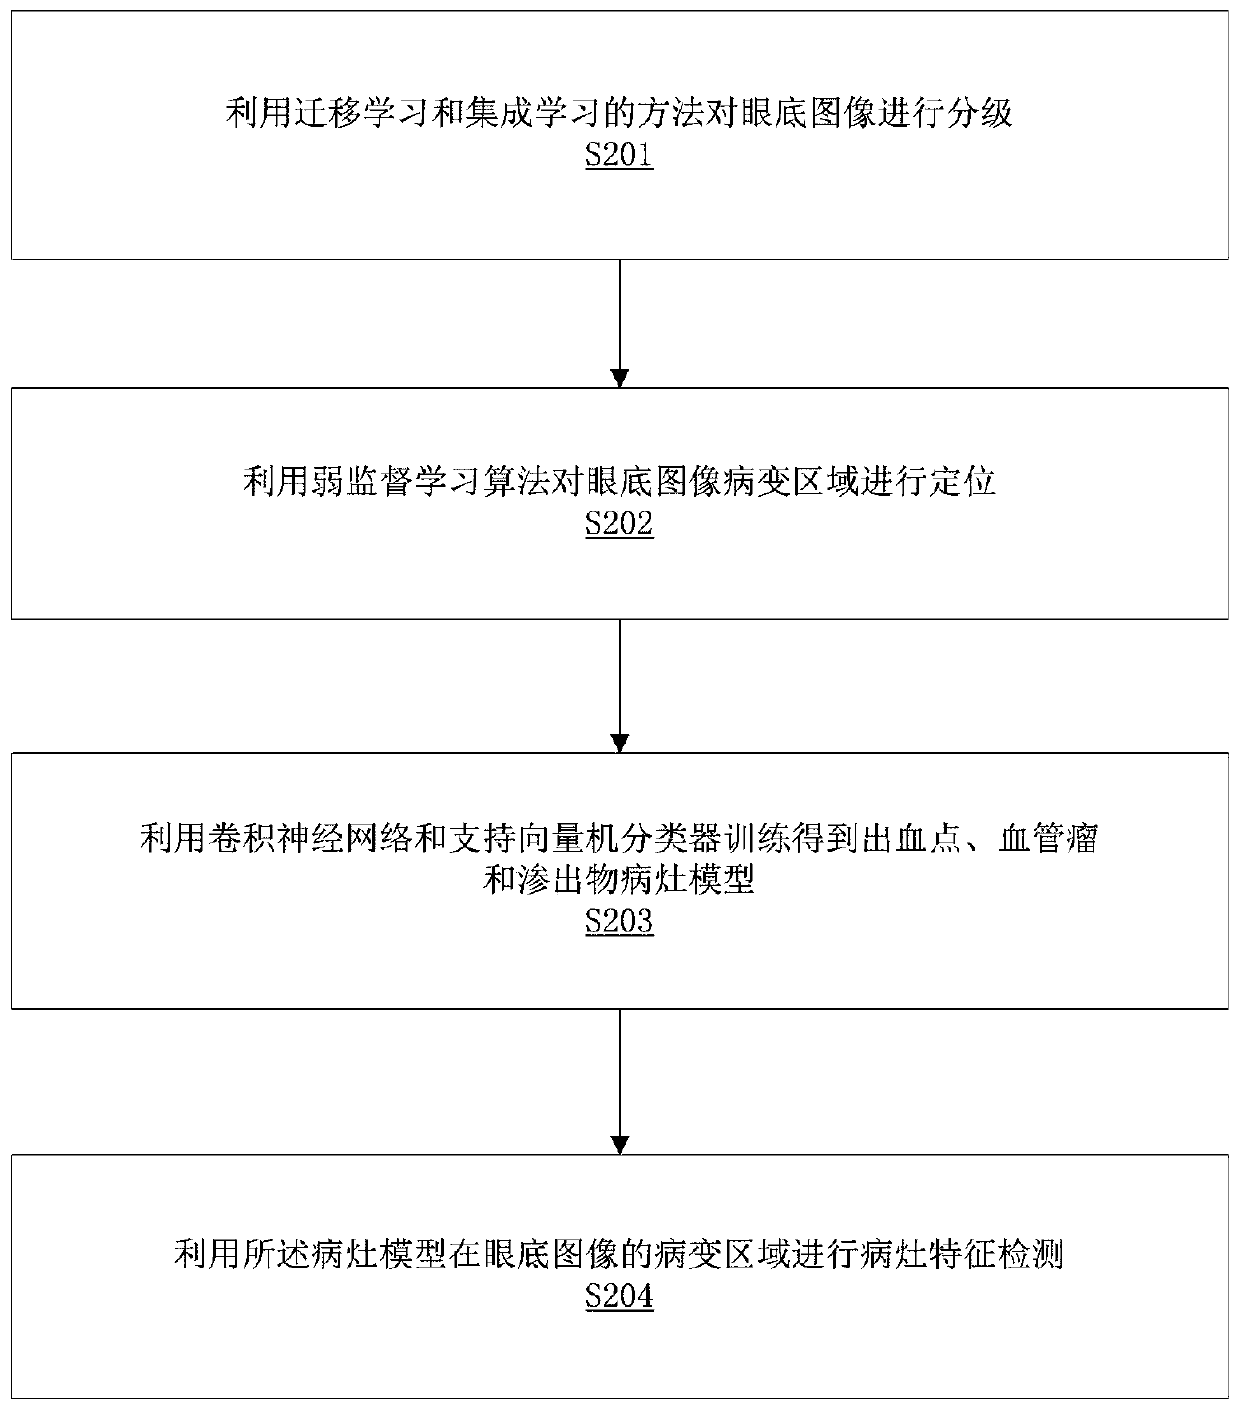 High-specificity diabetic retinopathy characteristic detection method and storage equipment